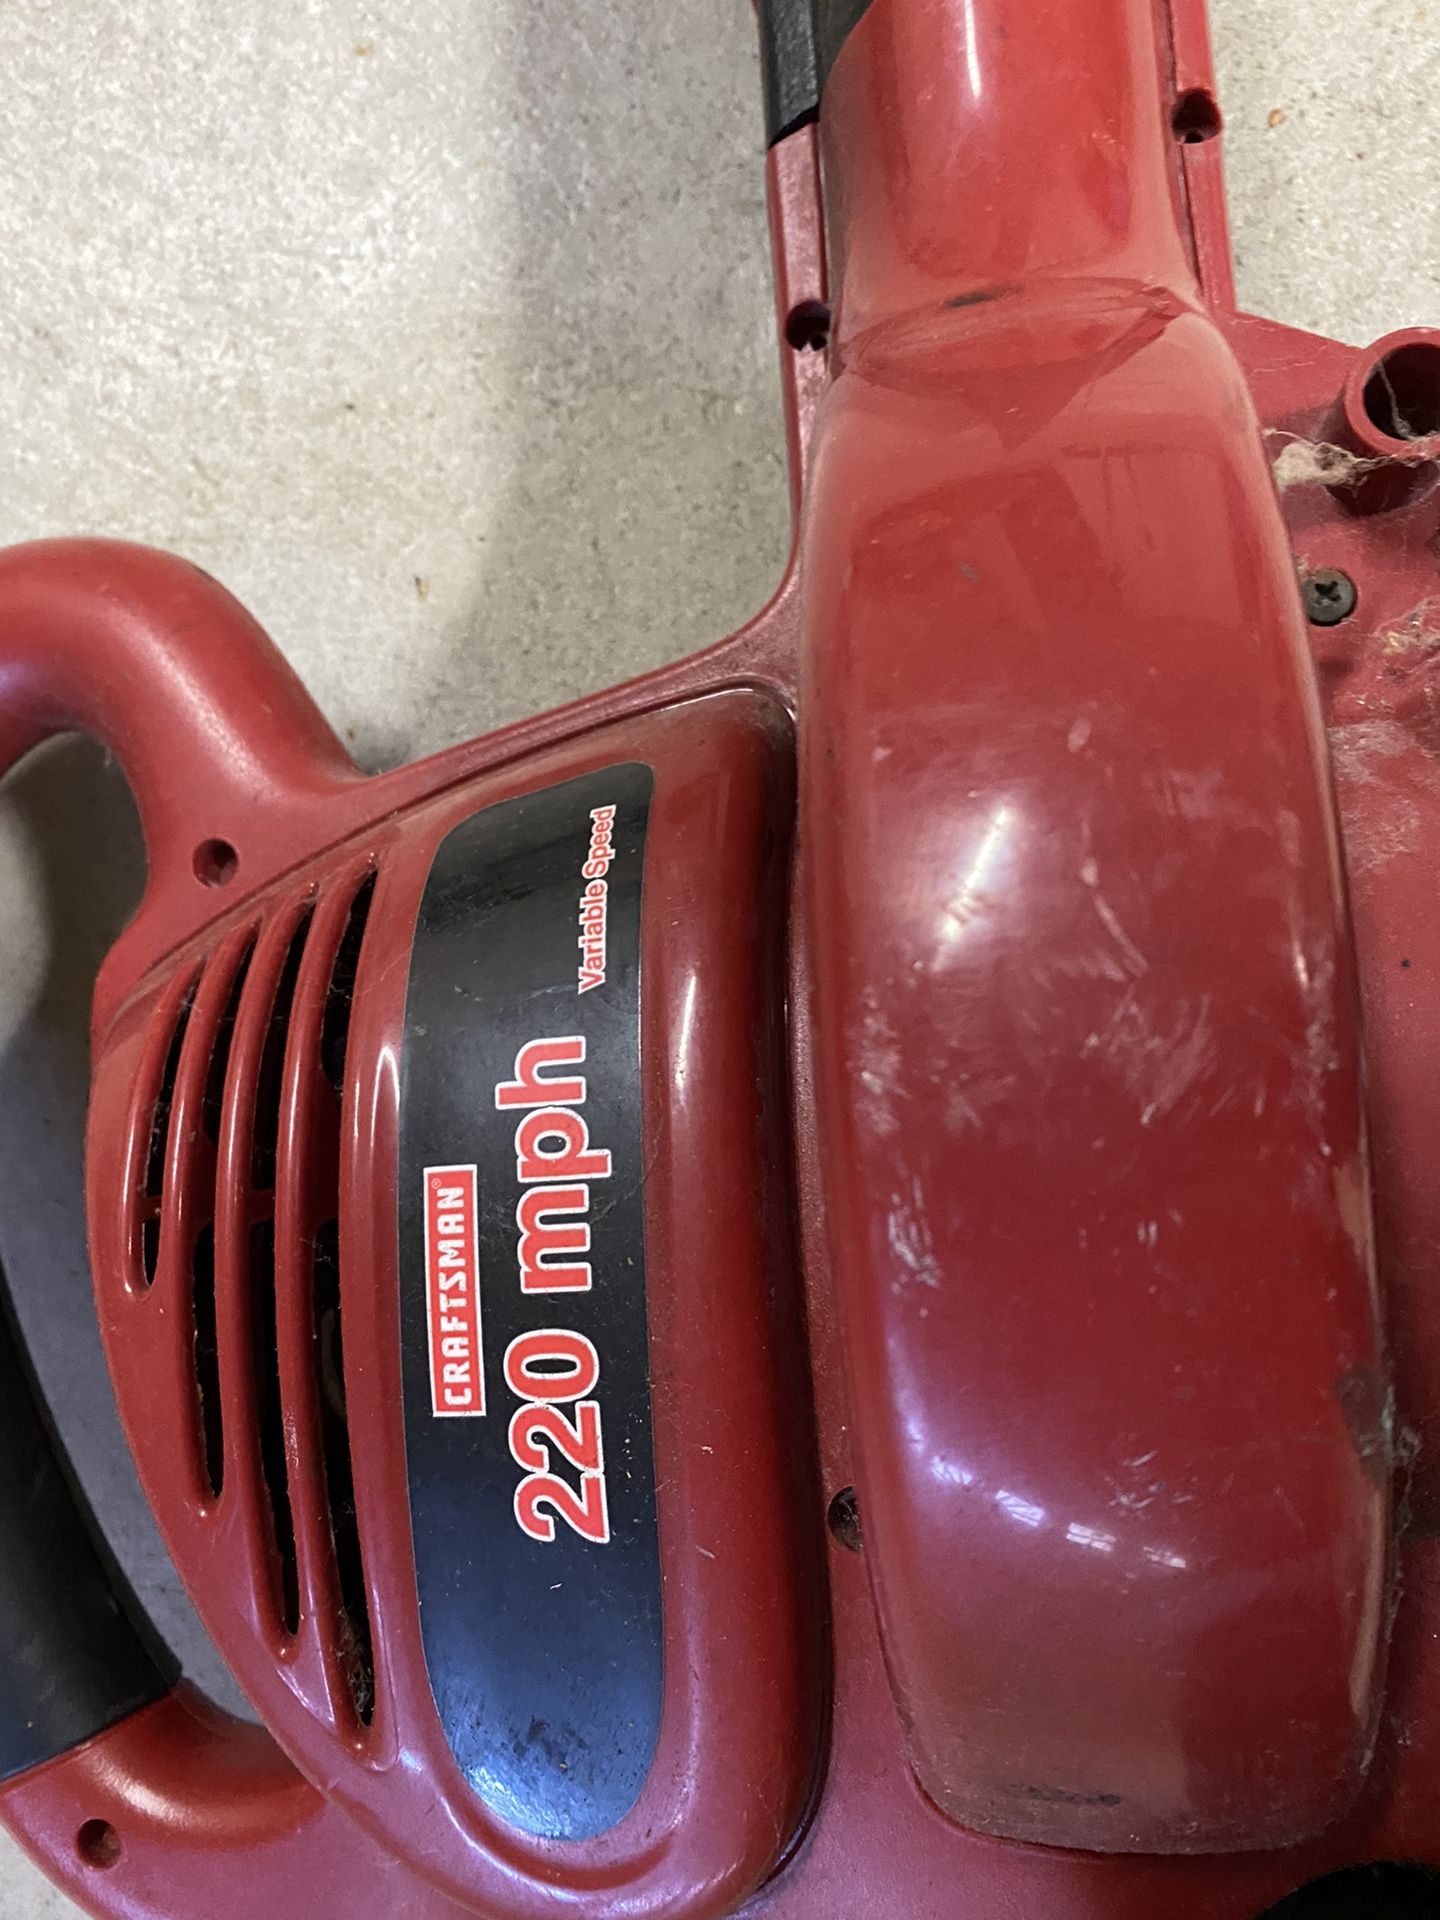 Leaf Blower (corded) and Powerful 